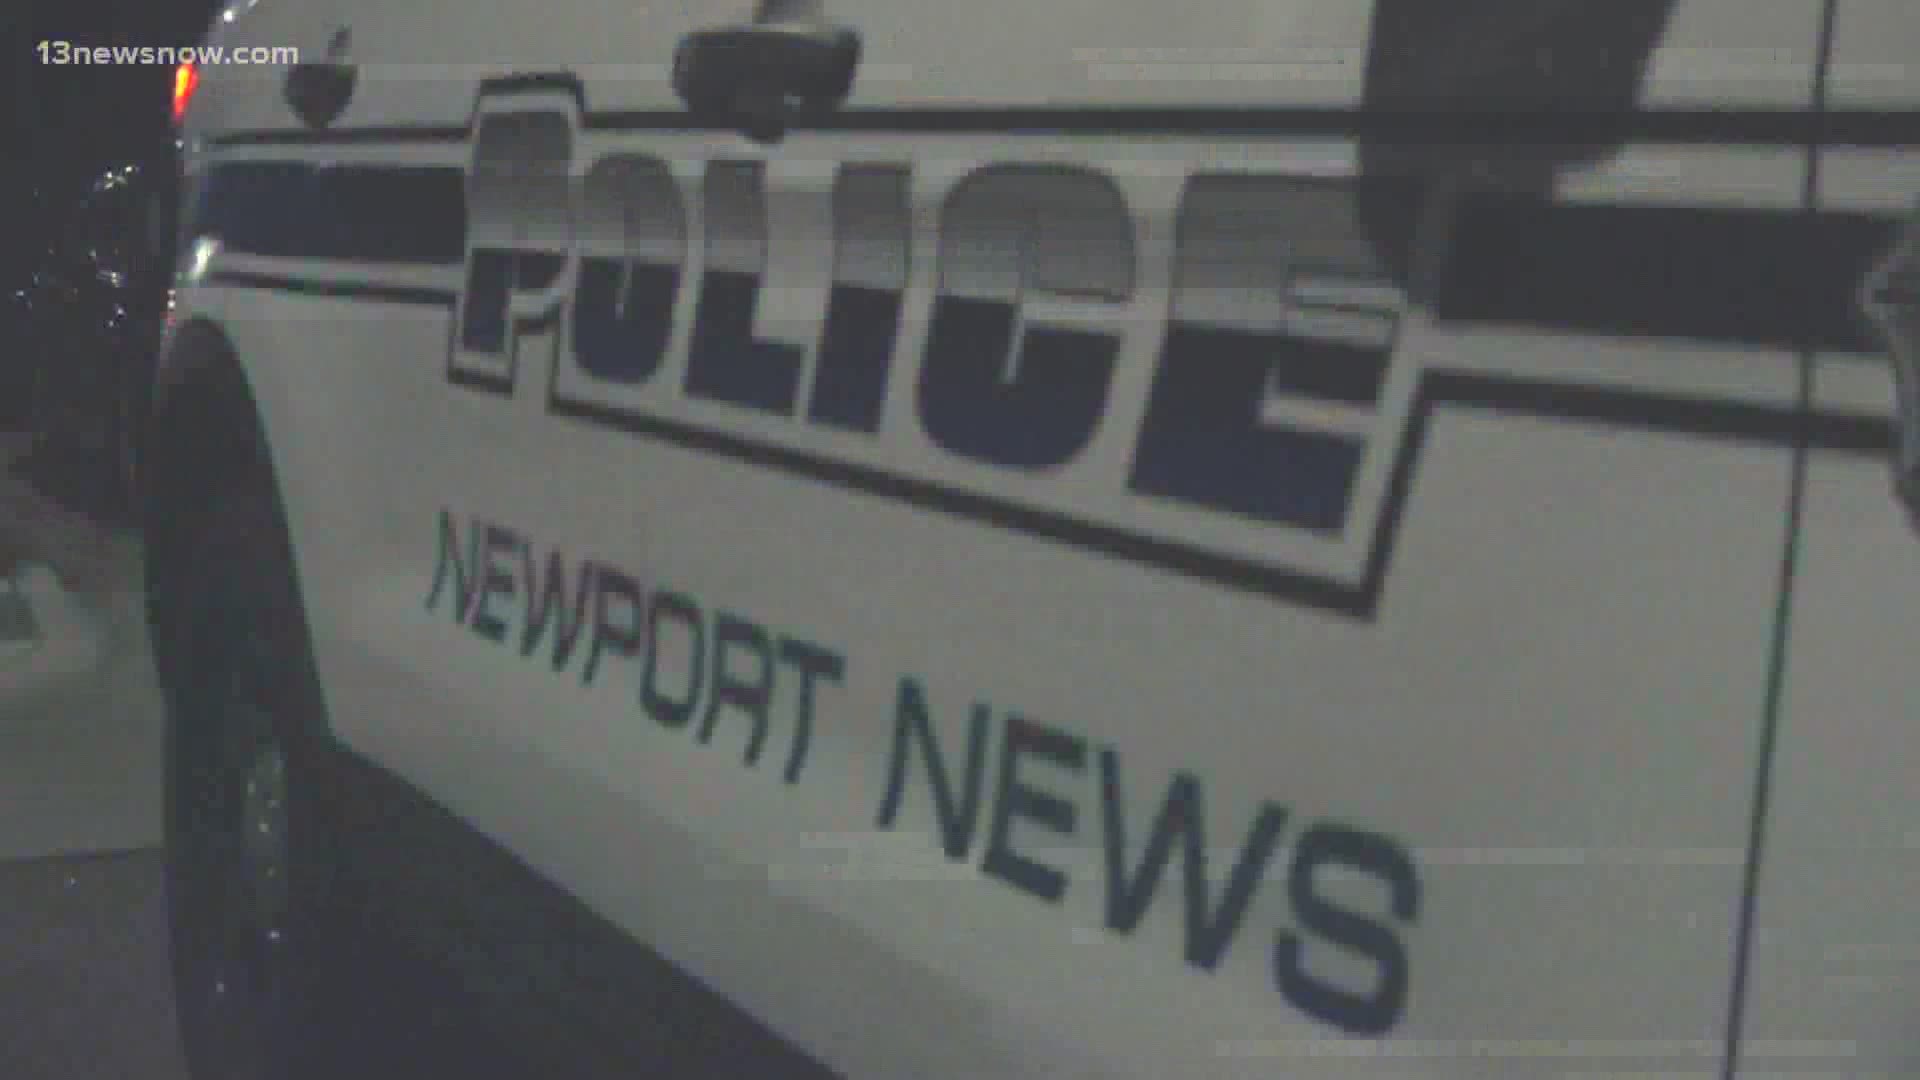 Newport News Police have identified the man who was killed in a shooting Thursday night. The incident happened on the 700 block of 33rd Street.